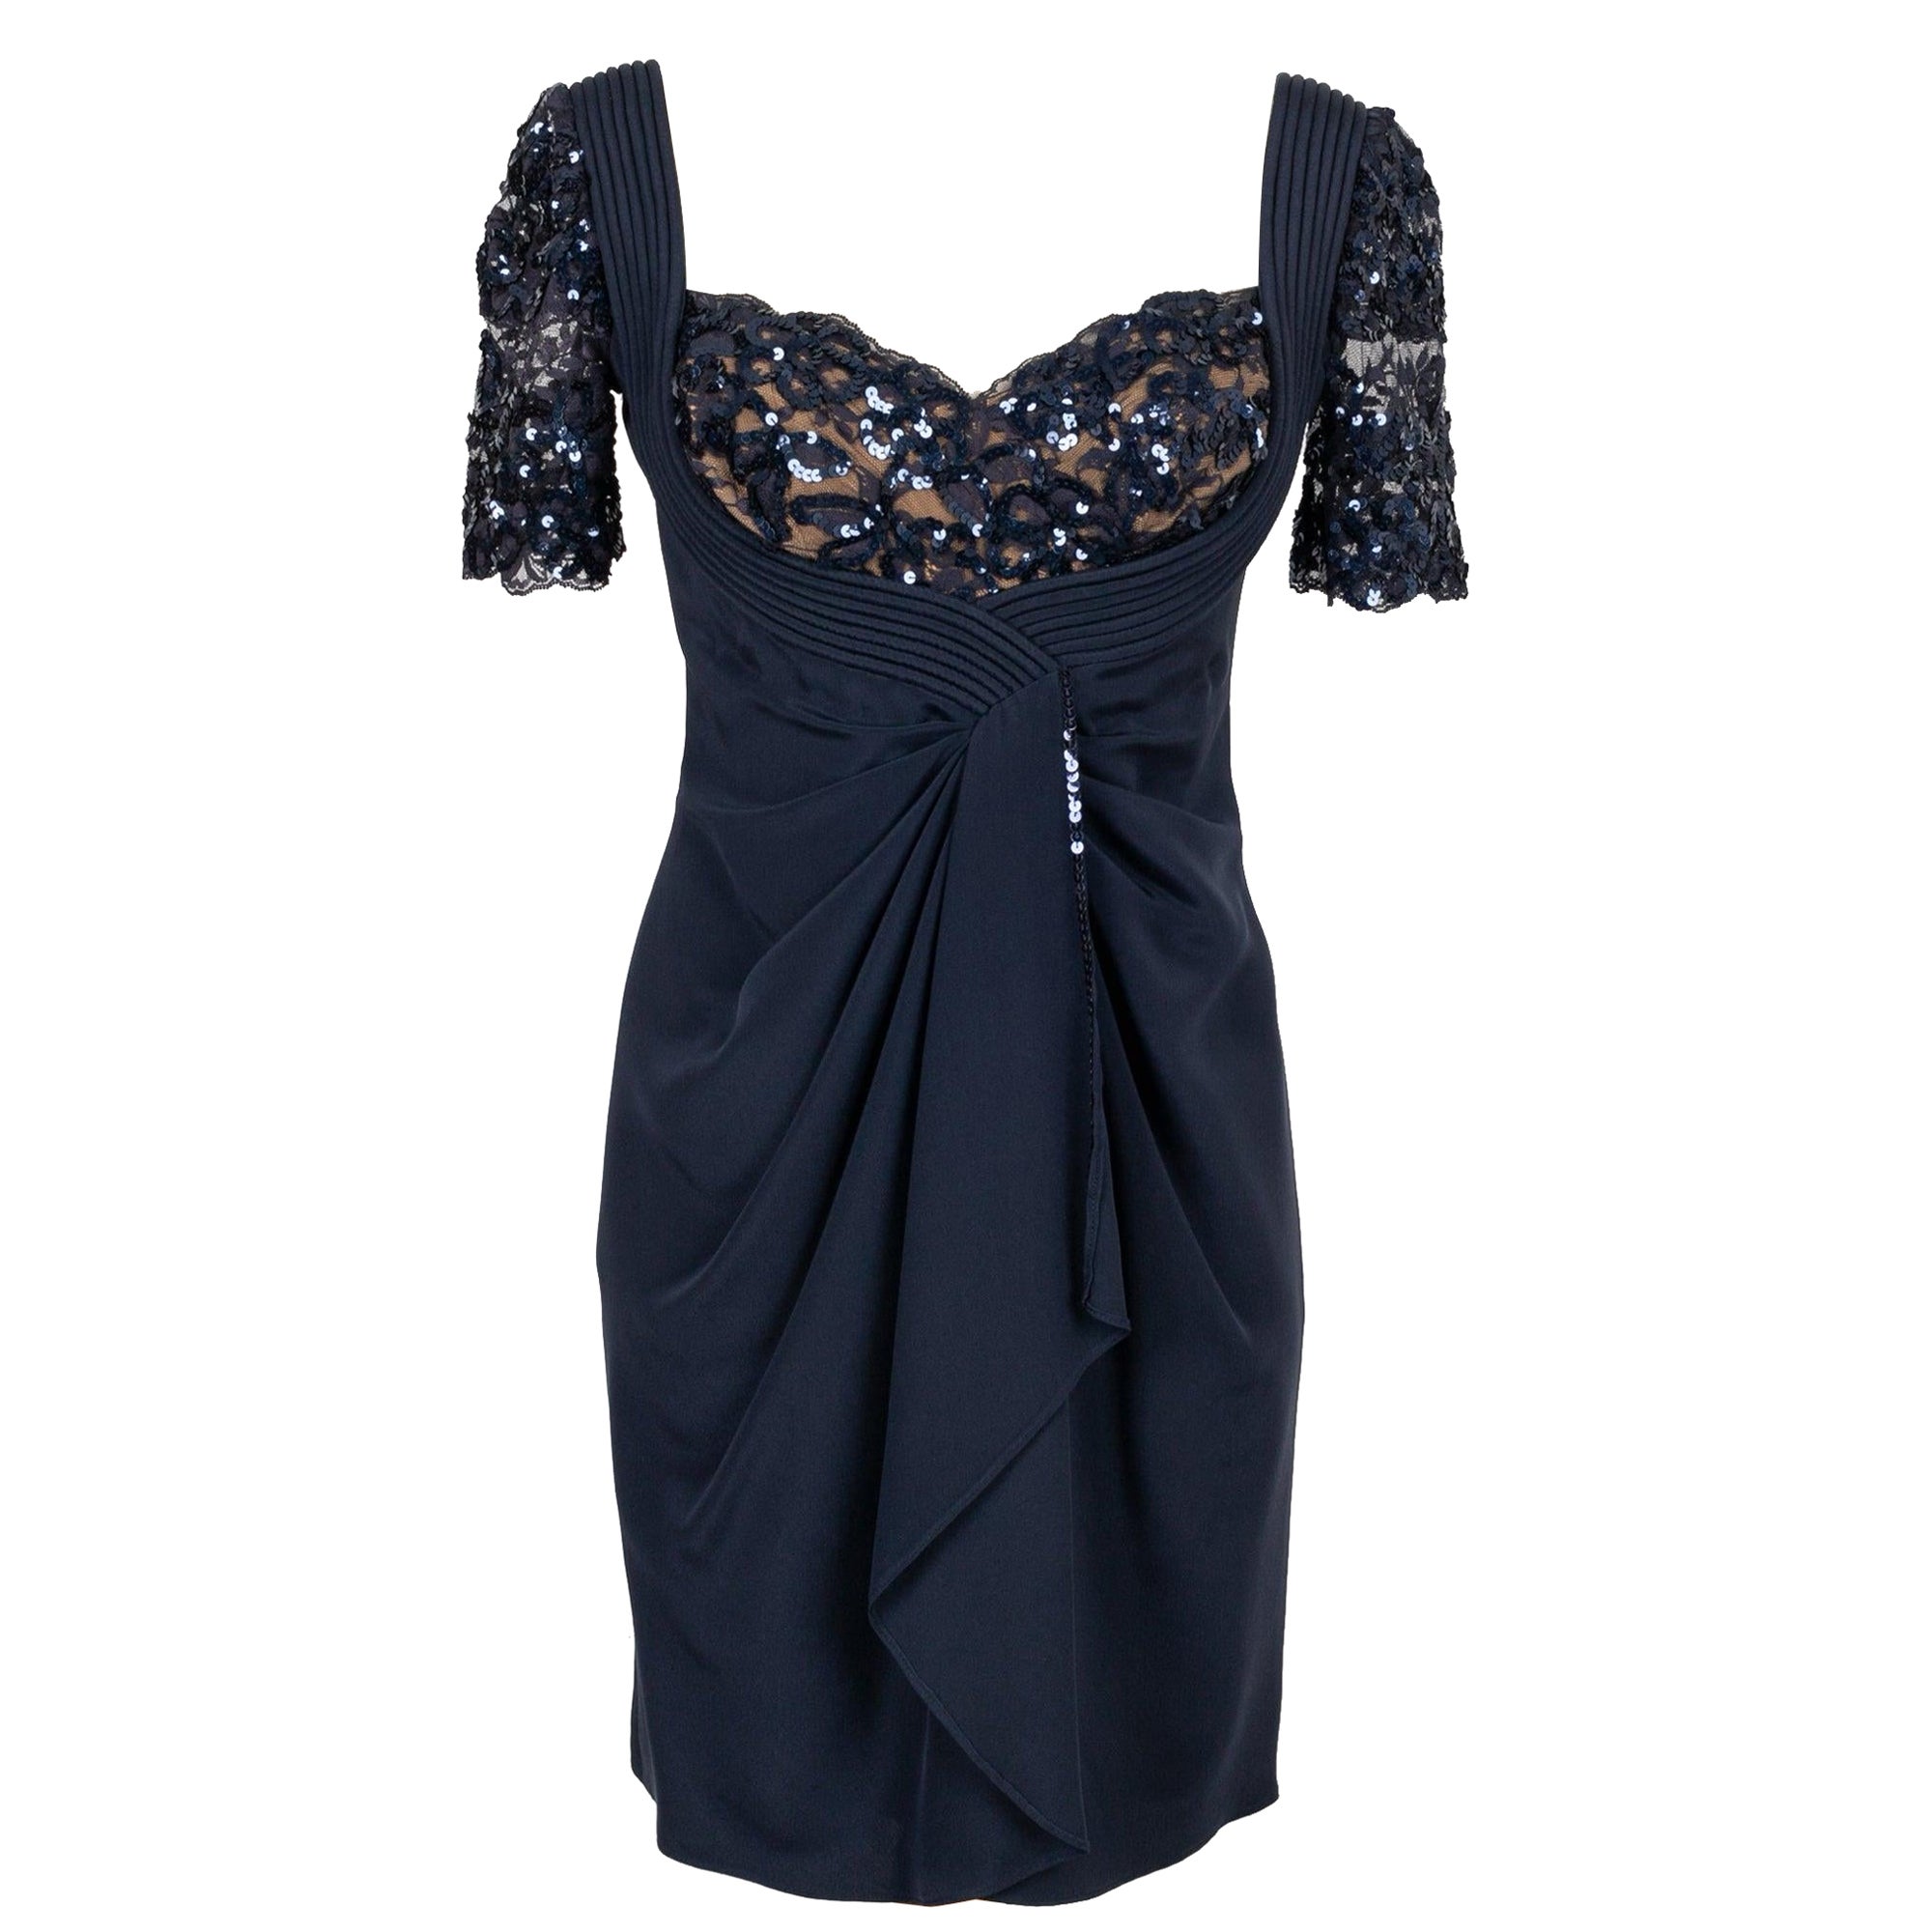 Loris Azzaro Midnight Blue Evening Dress in Taffeta, Lace and Sequins For Sale